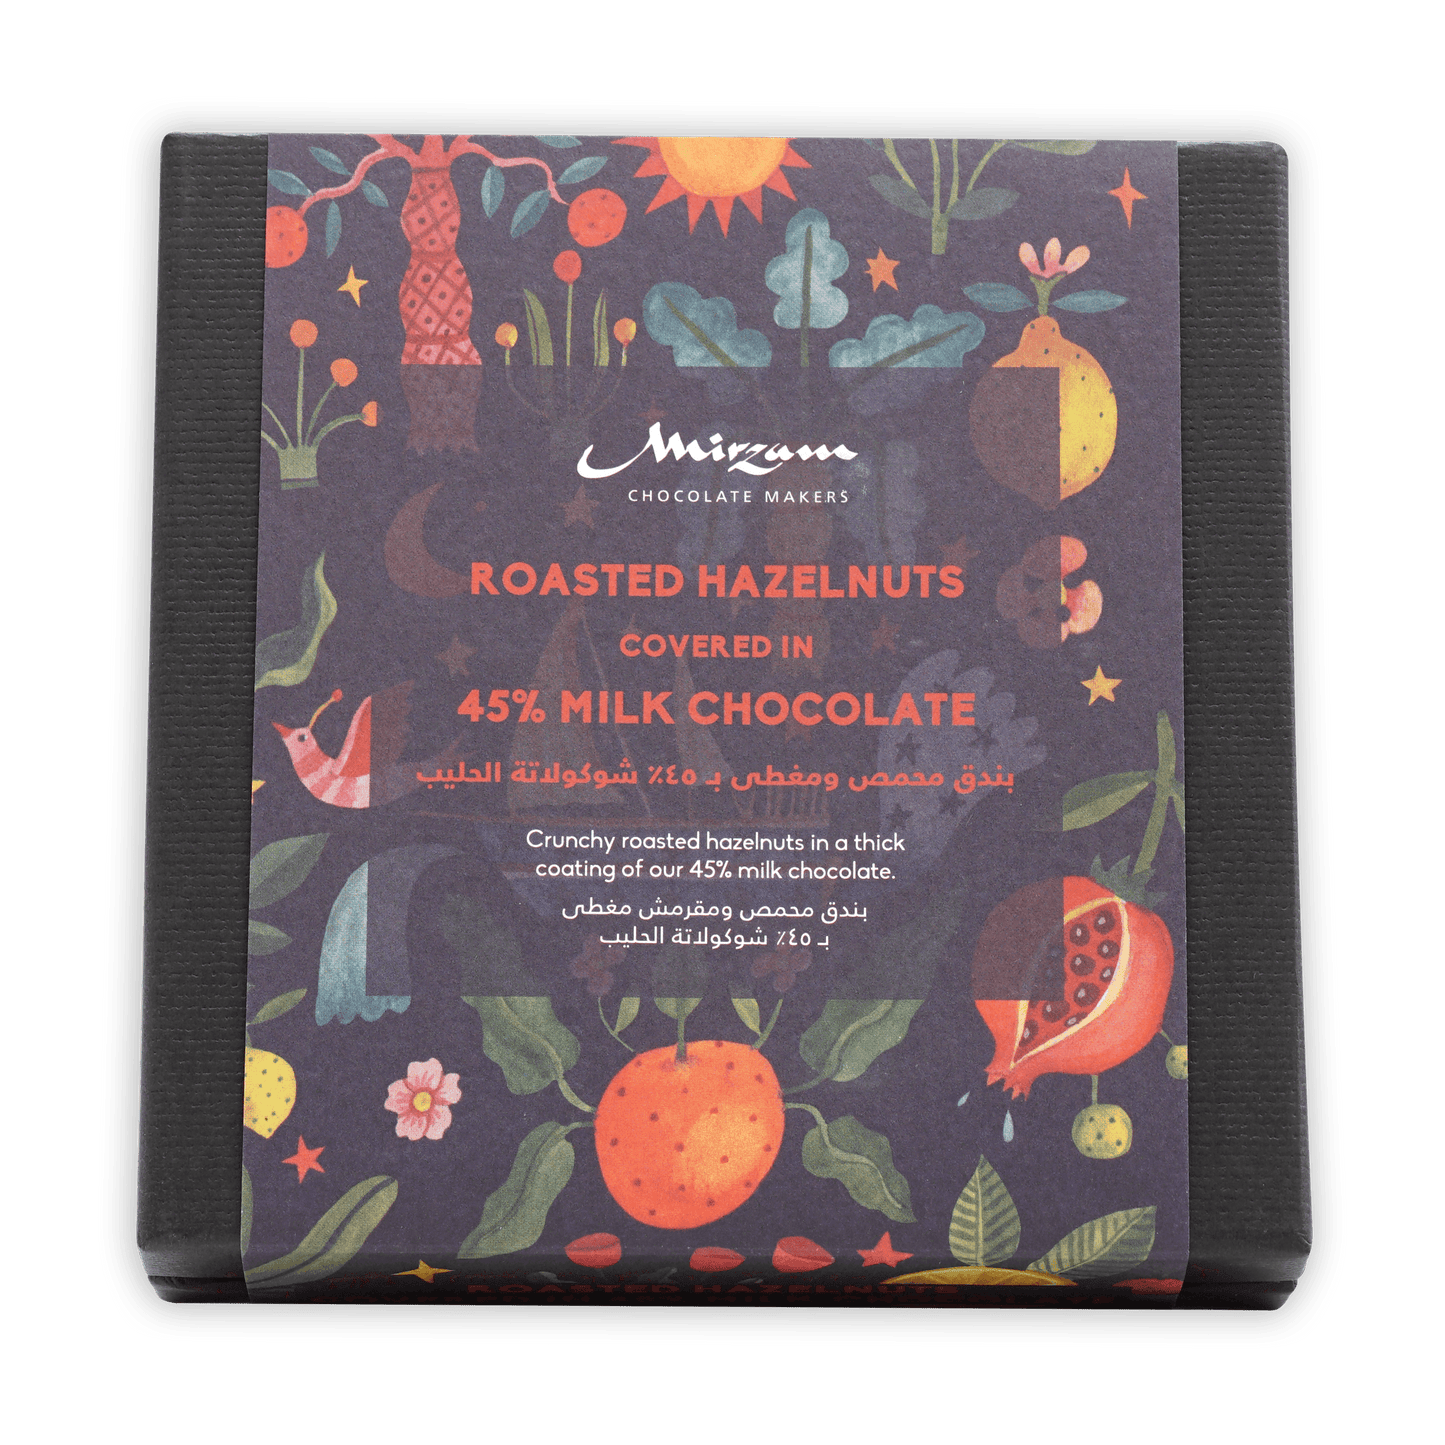 Mirzam Roasted Hazelnuts Covered in Milk Chocolate 45%